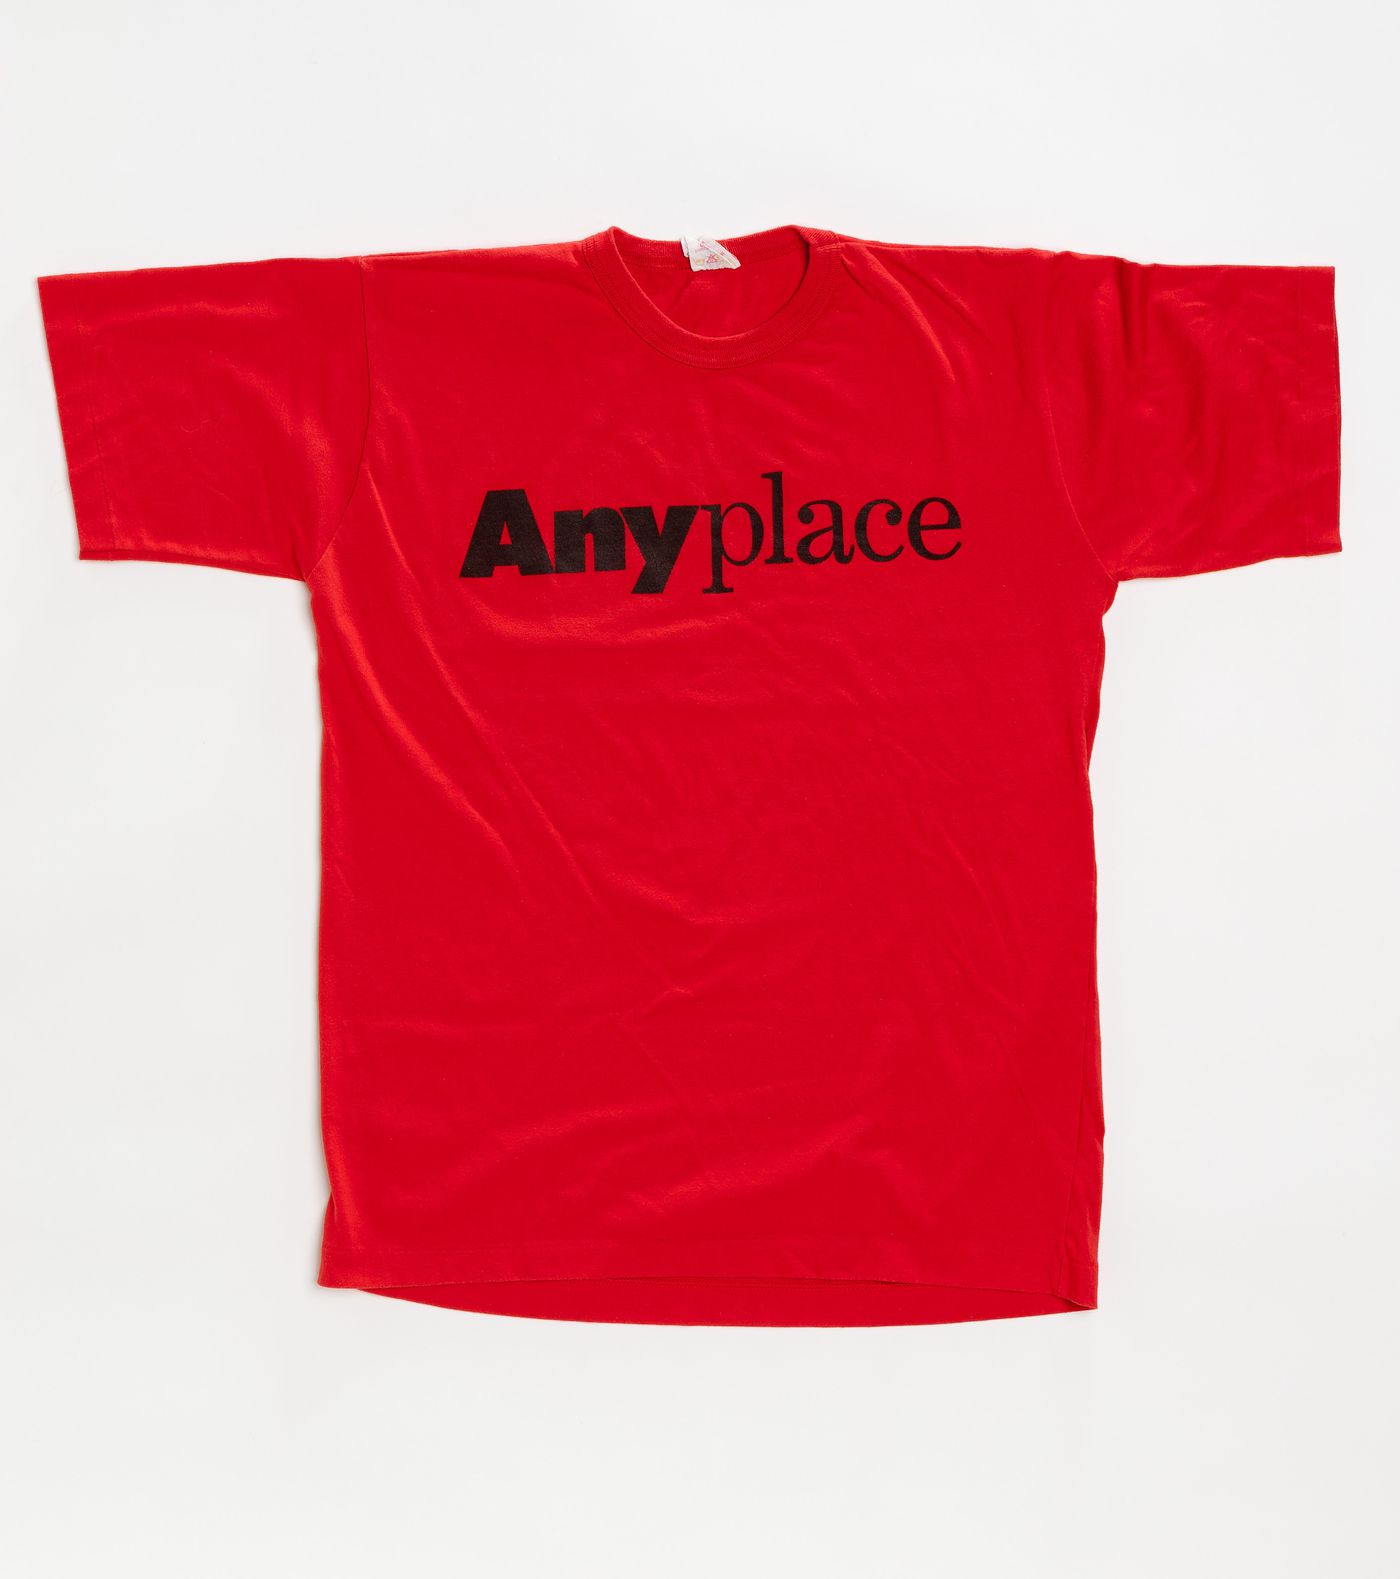 T-shirt produced for participants of the fourth Any conference